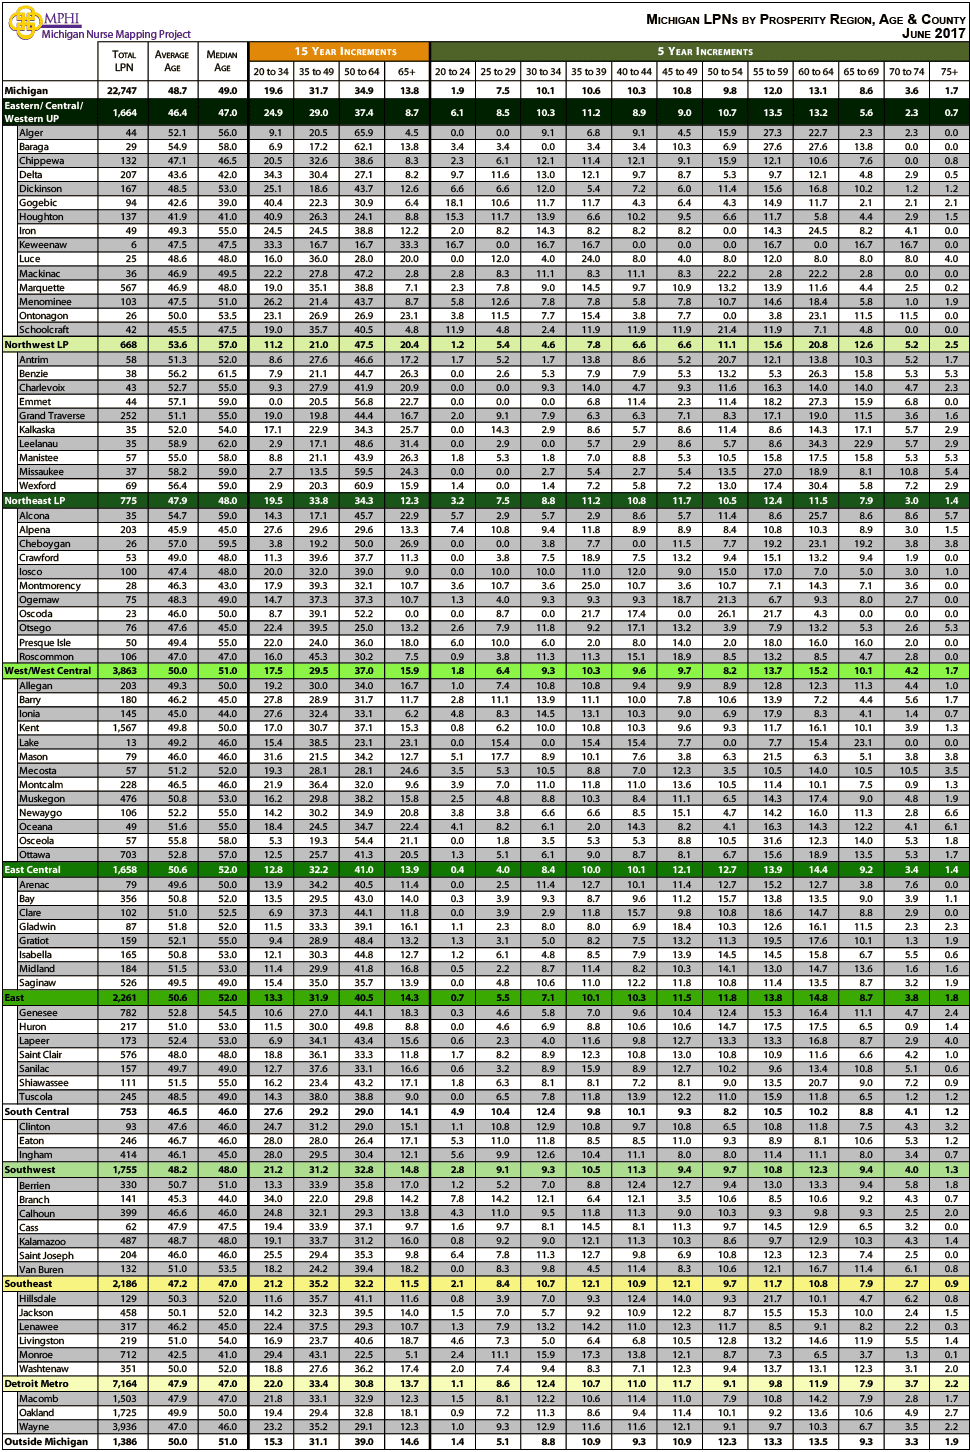 table depicting Michigan's Licensed Practical Nurses by age groups, county and prosperity regions in 2017